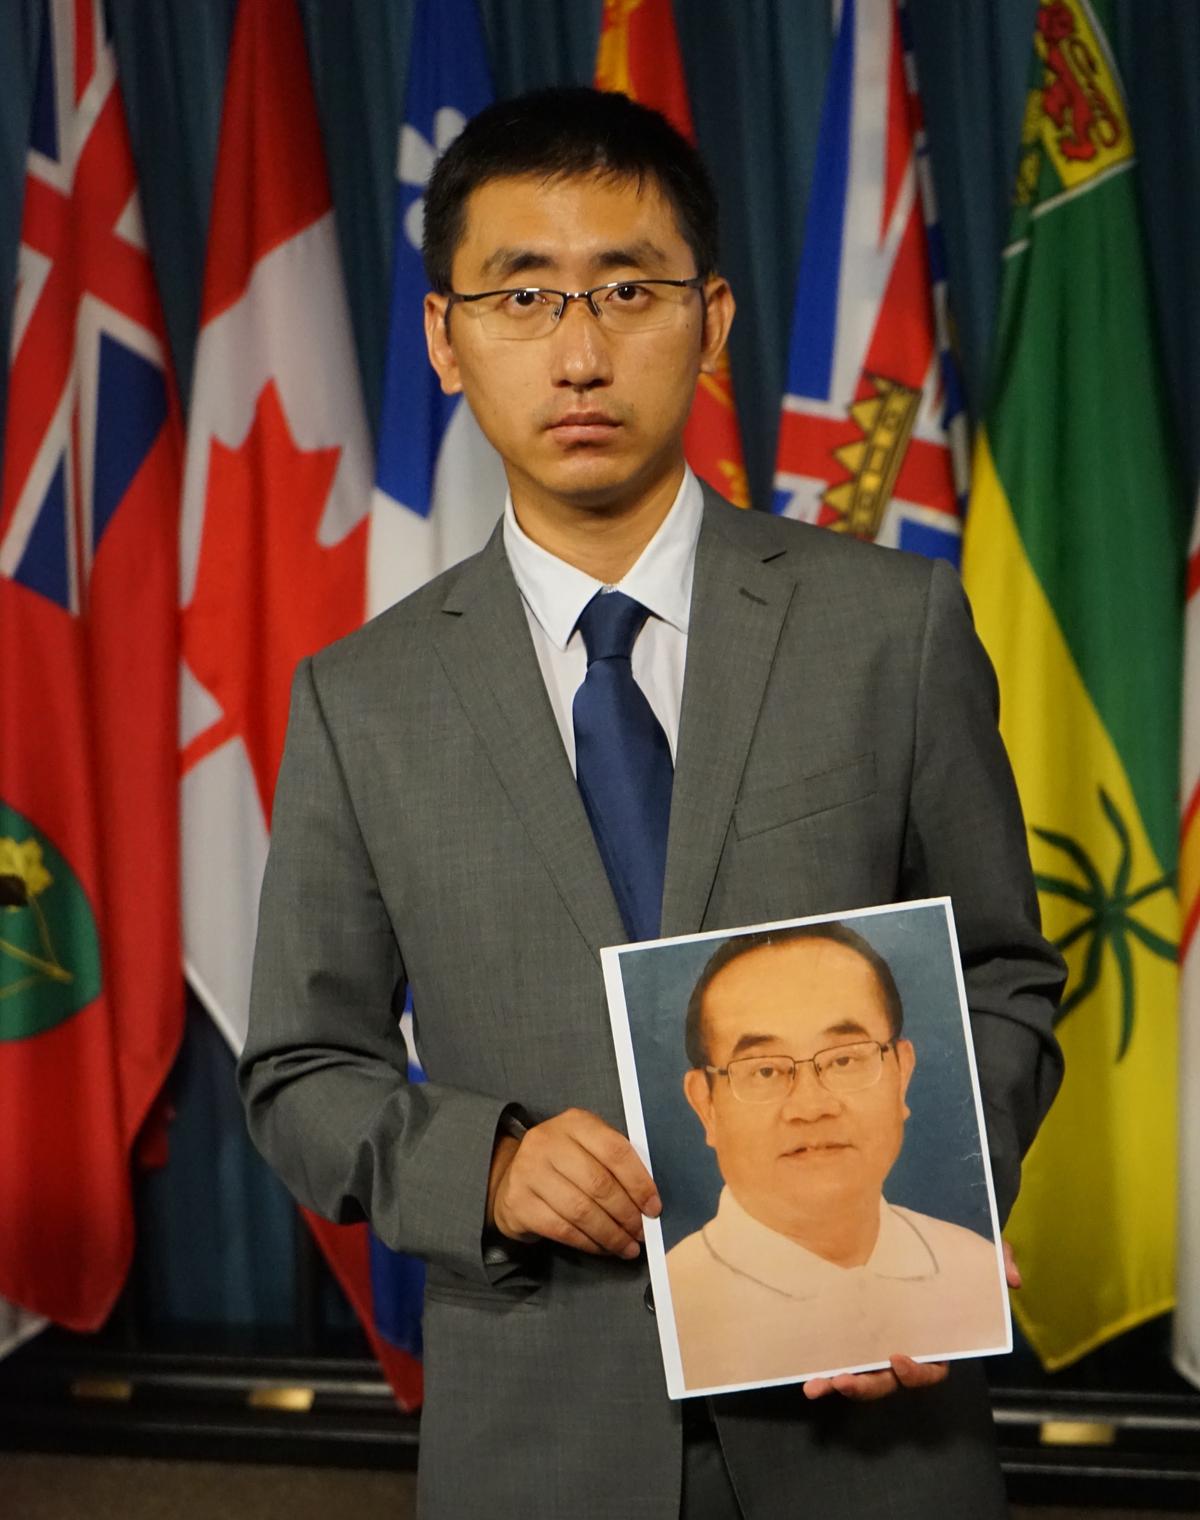 Falun Gong practitioner Paul Li holds a photo of his father, Xiaobo Li, who was detained for the second time in China in 2014 and sentenced to a second eight years of imprisonment, at a press conference in Ottawa on Aug. 26, 2016. (Pam McLennan/Epoch Times)